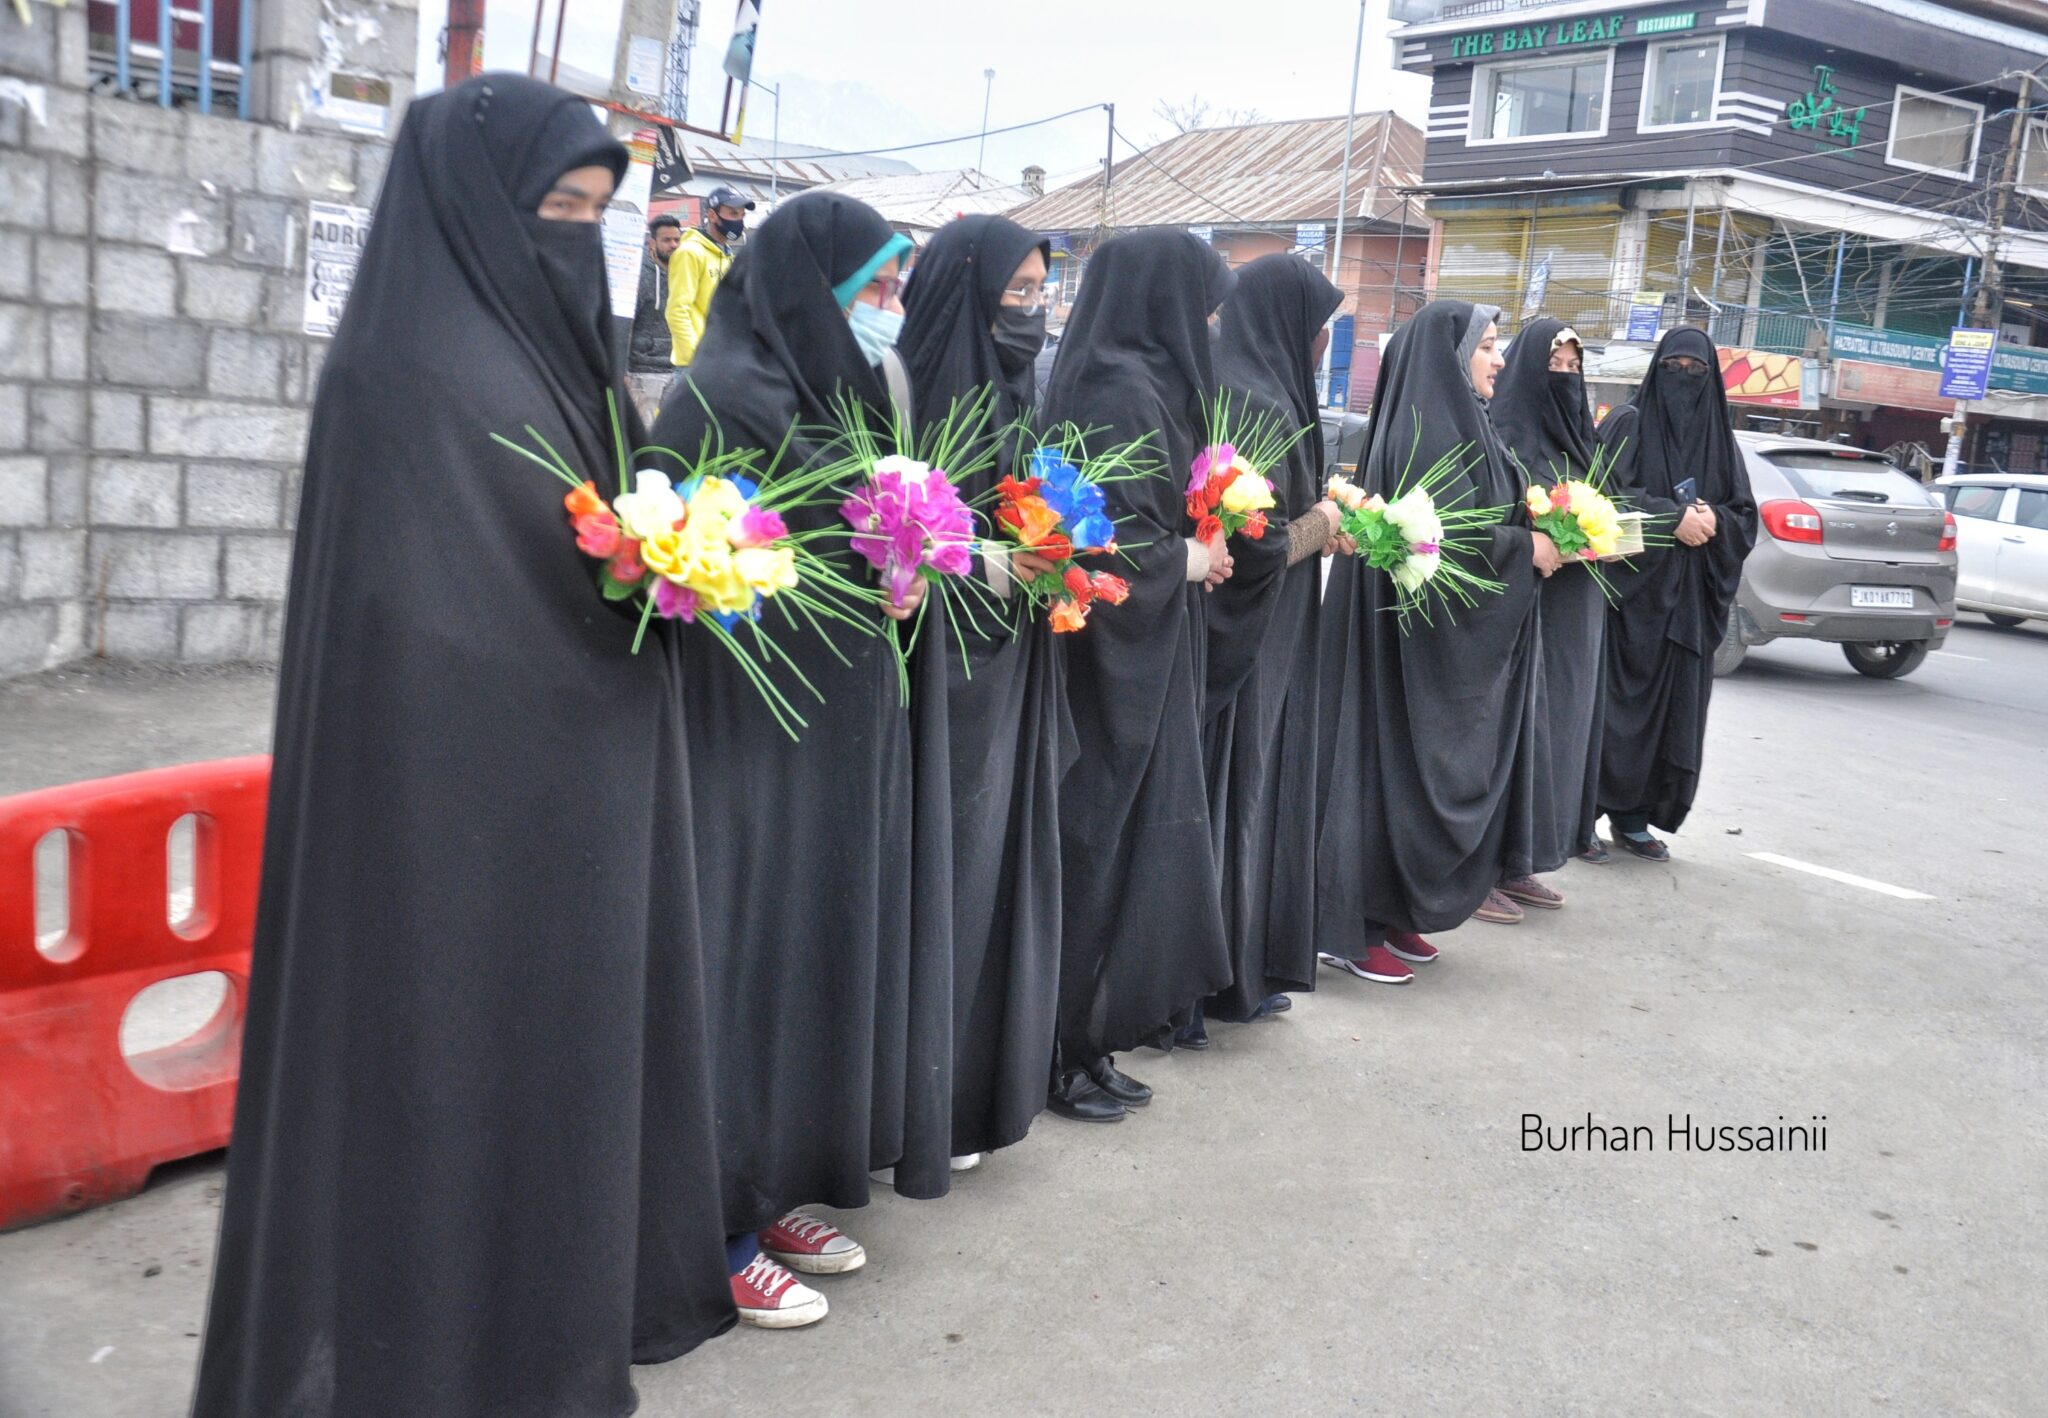 Ladies offer flowers to hijab-clad students outside Kashmir University